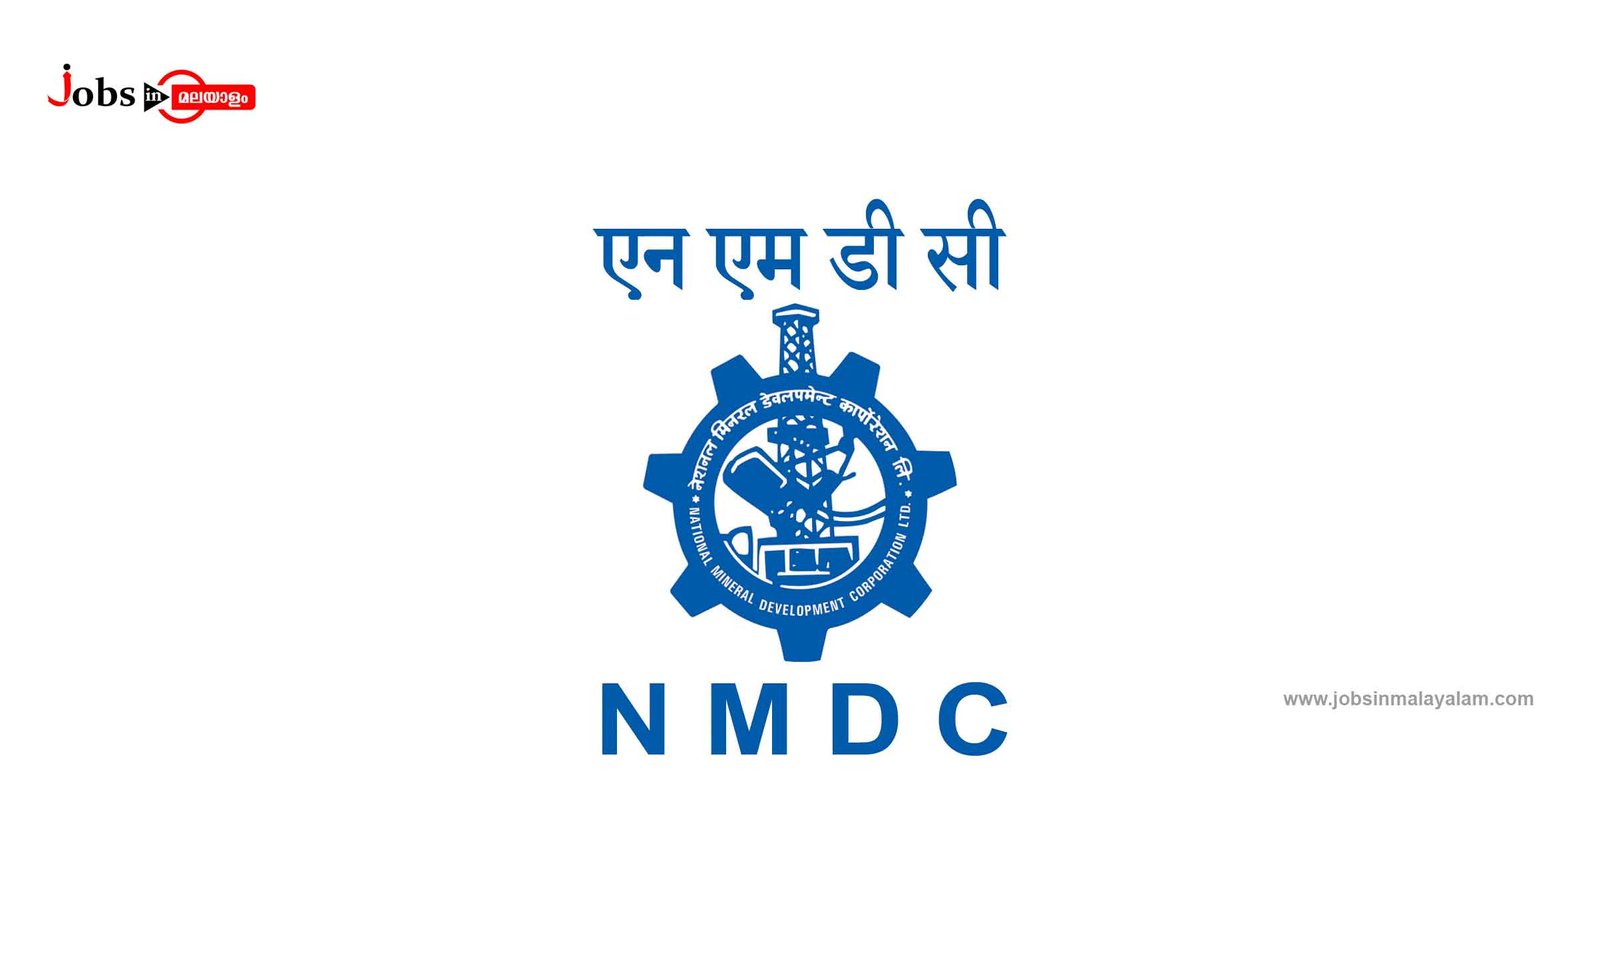 National Mineral Development Corporation (NMDC) Limited